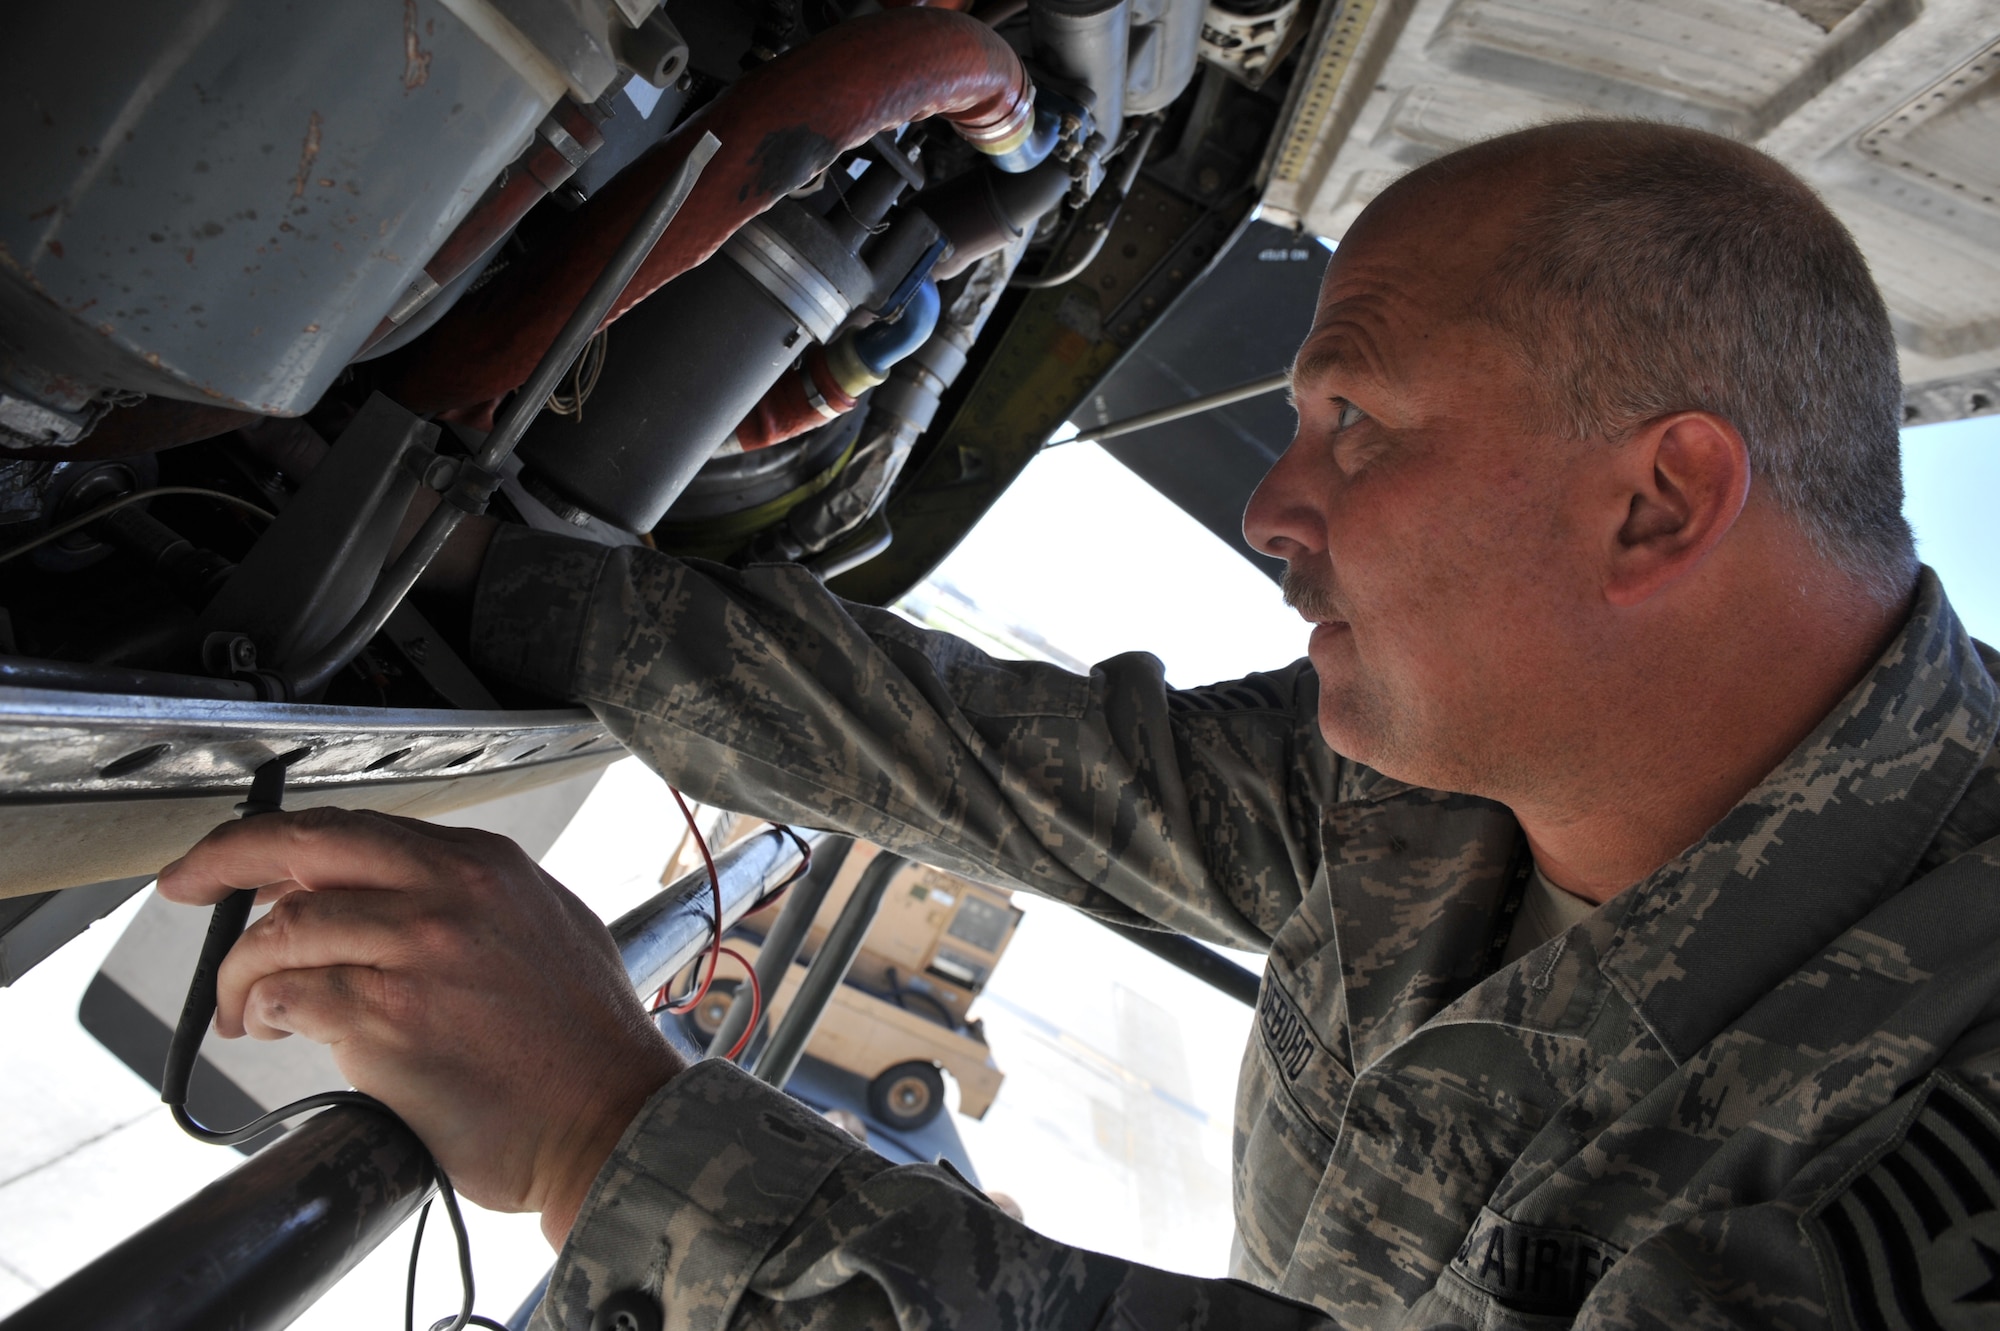 Tech. Sgt. Donald Debord, 455th Expeditionary Aircraft Maintenance Squadron crewchief, inspects an engine cowling during a routine inspection on a C-130 Hercules at Bagram Airfield, Afghanistan, June 2, 2011. Sergeant Debord is deployed from the 166th Aircraft Maintenance Squadron, Delaware Air National Guard, Del., and is a native of New Castle, Del.  (U.S. Air Force photo by Senior Airman Sheila deVera)